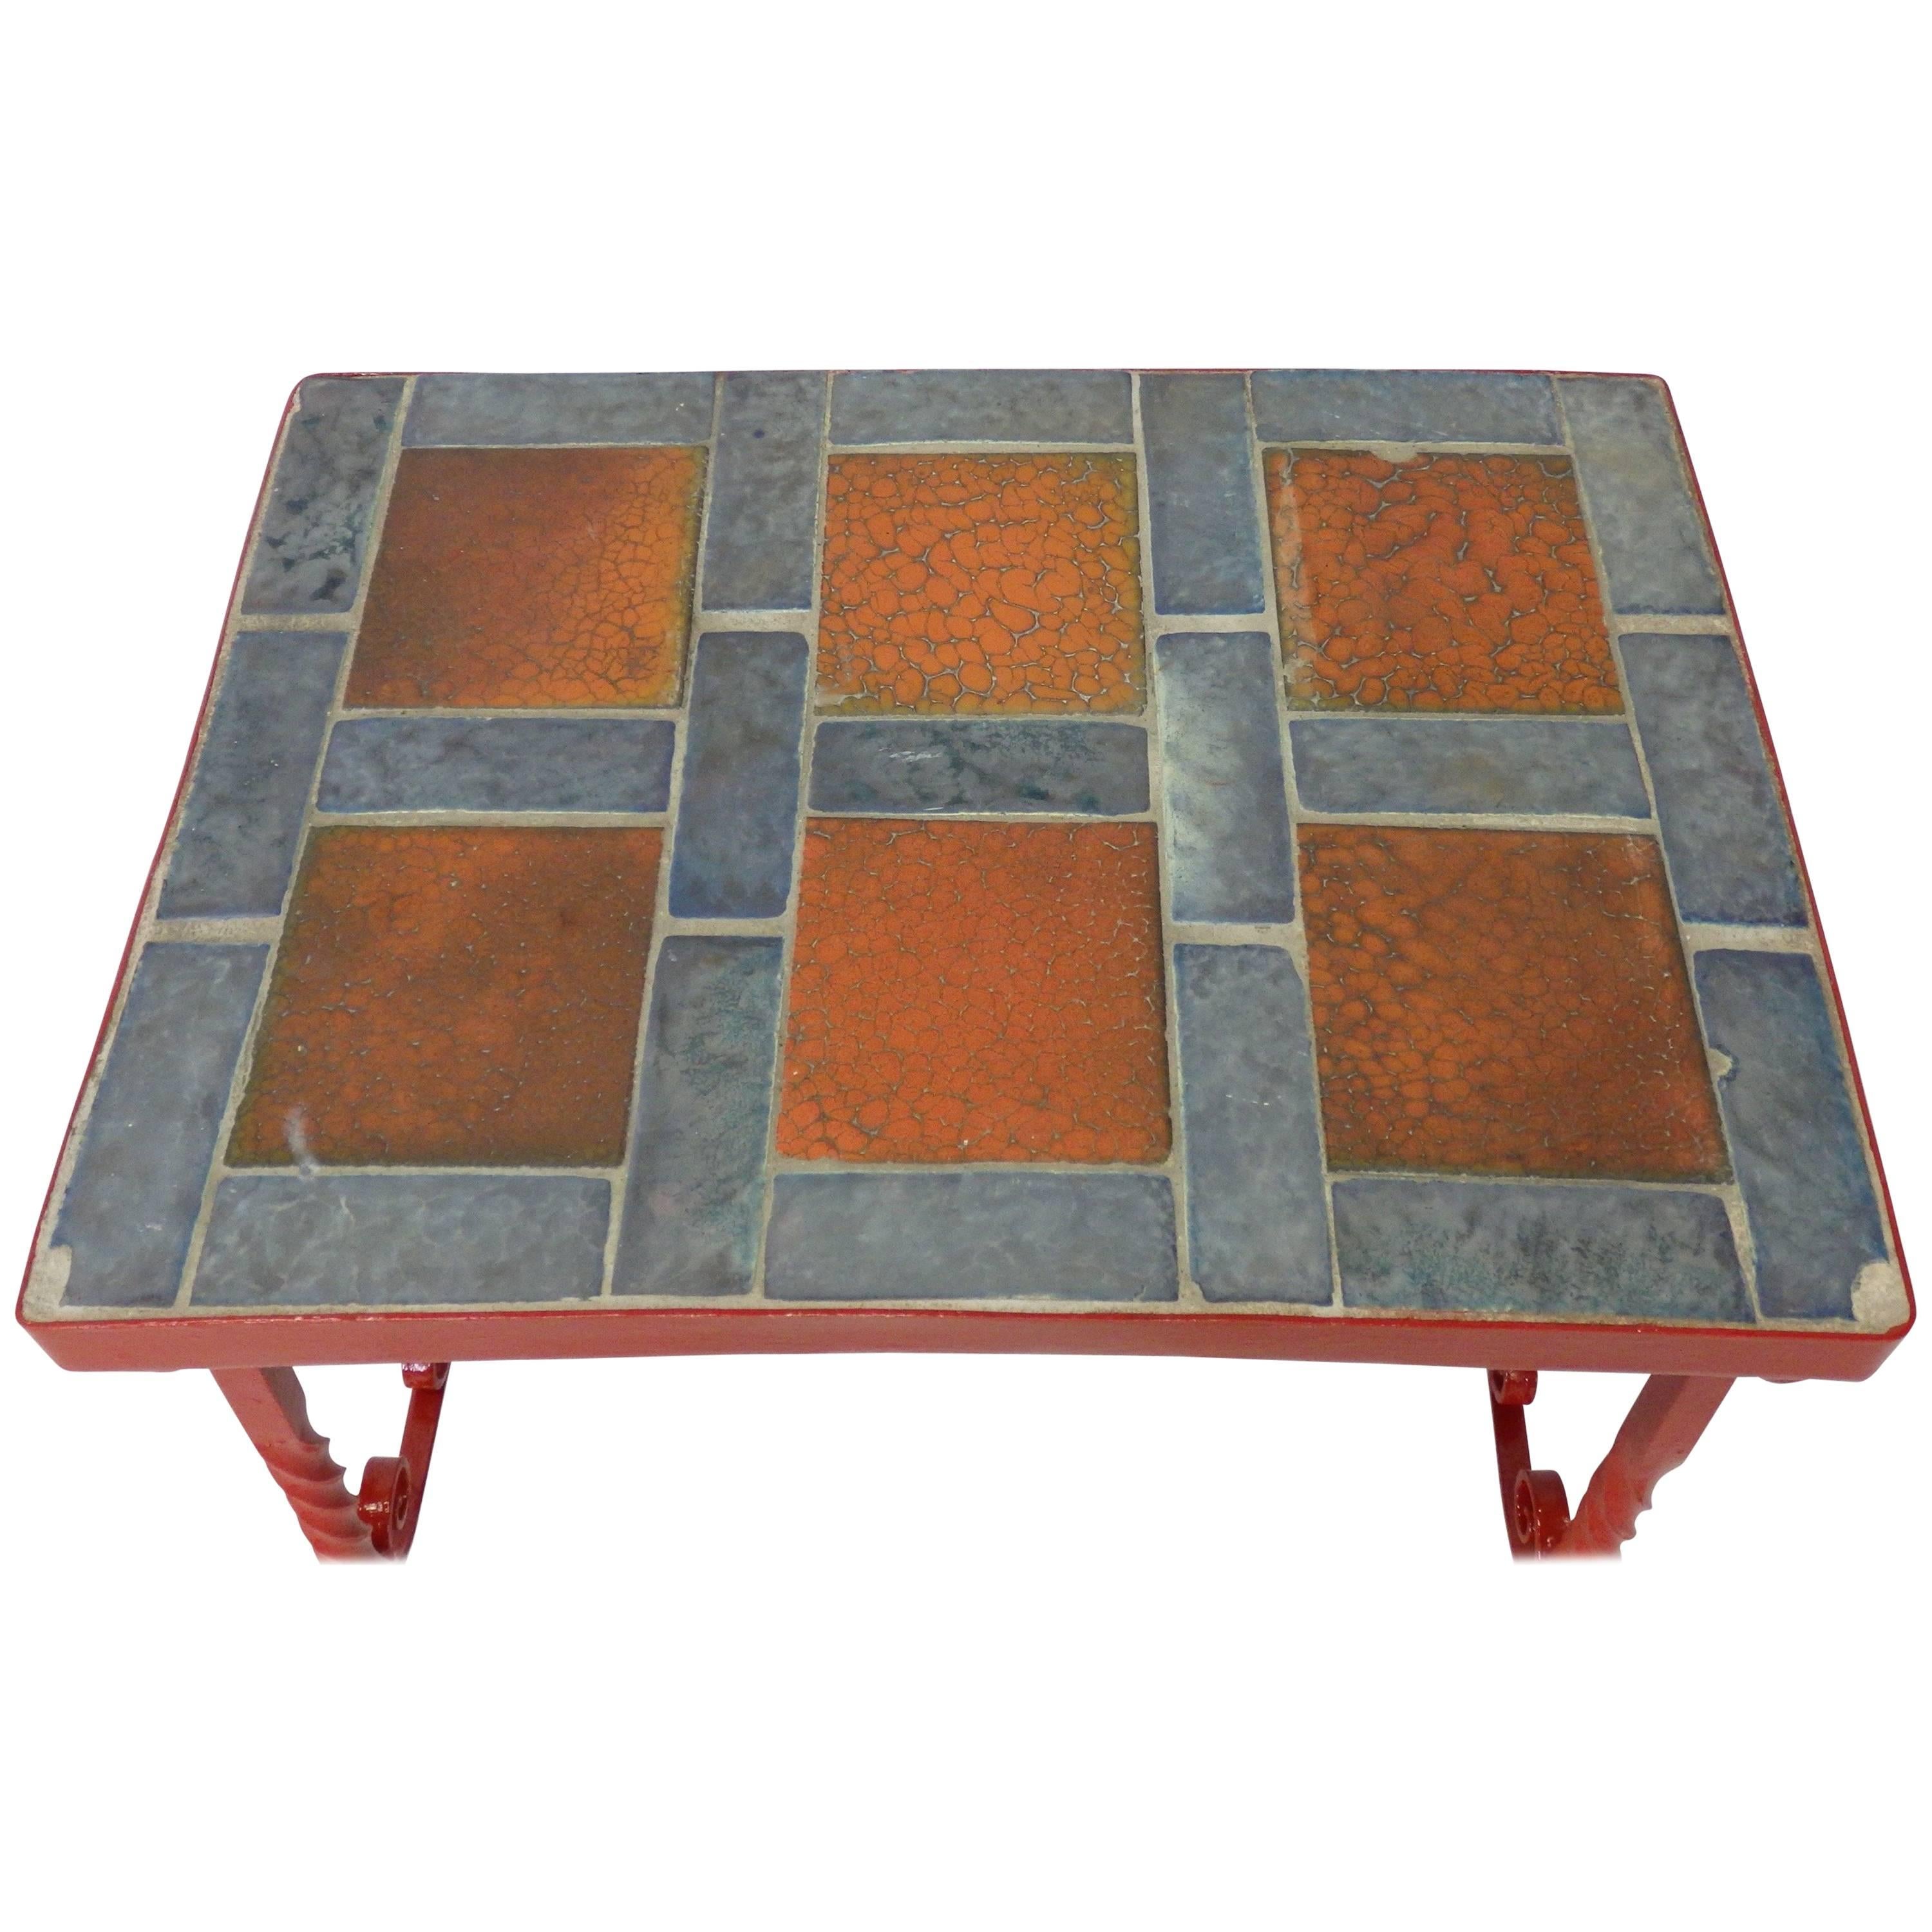 Early Tile in Cement Top Wrought Iron Table